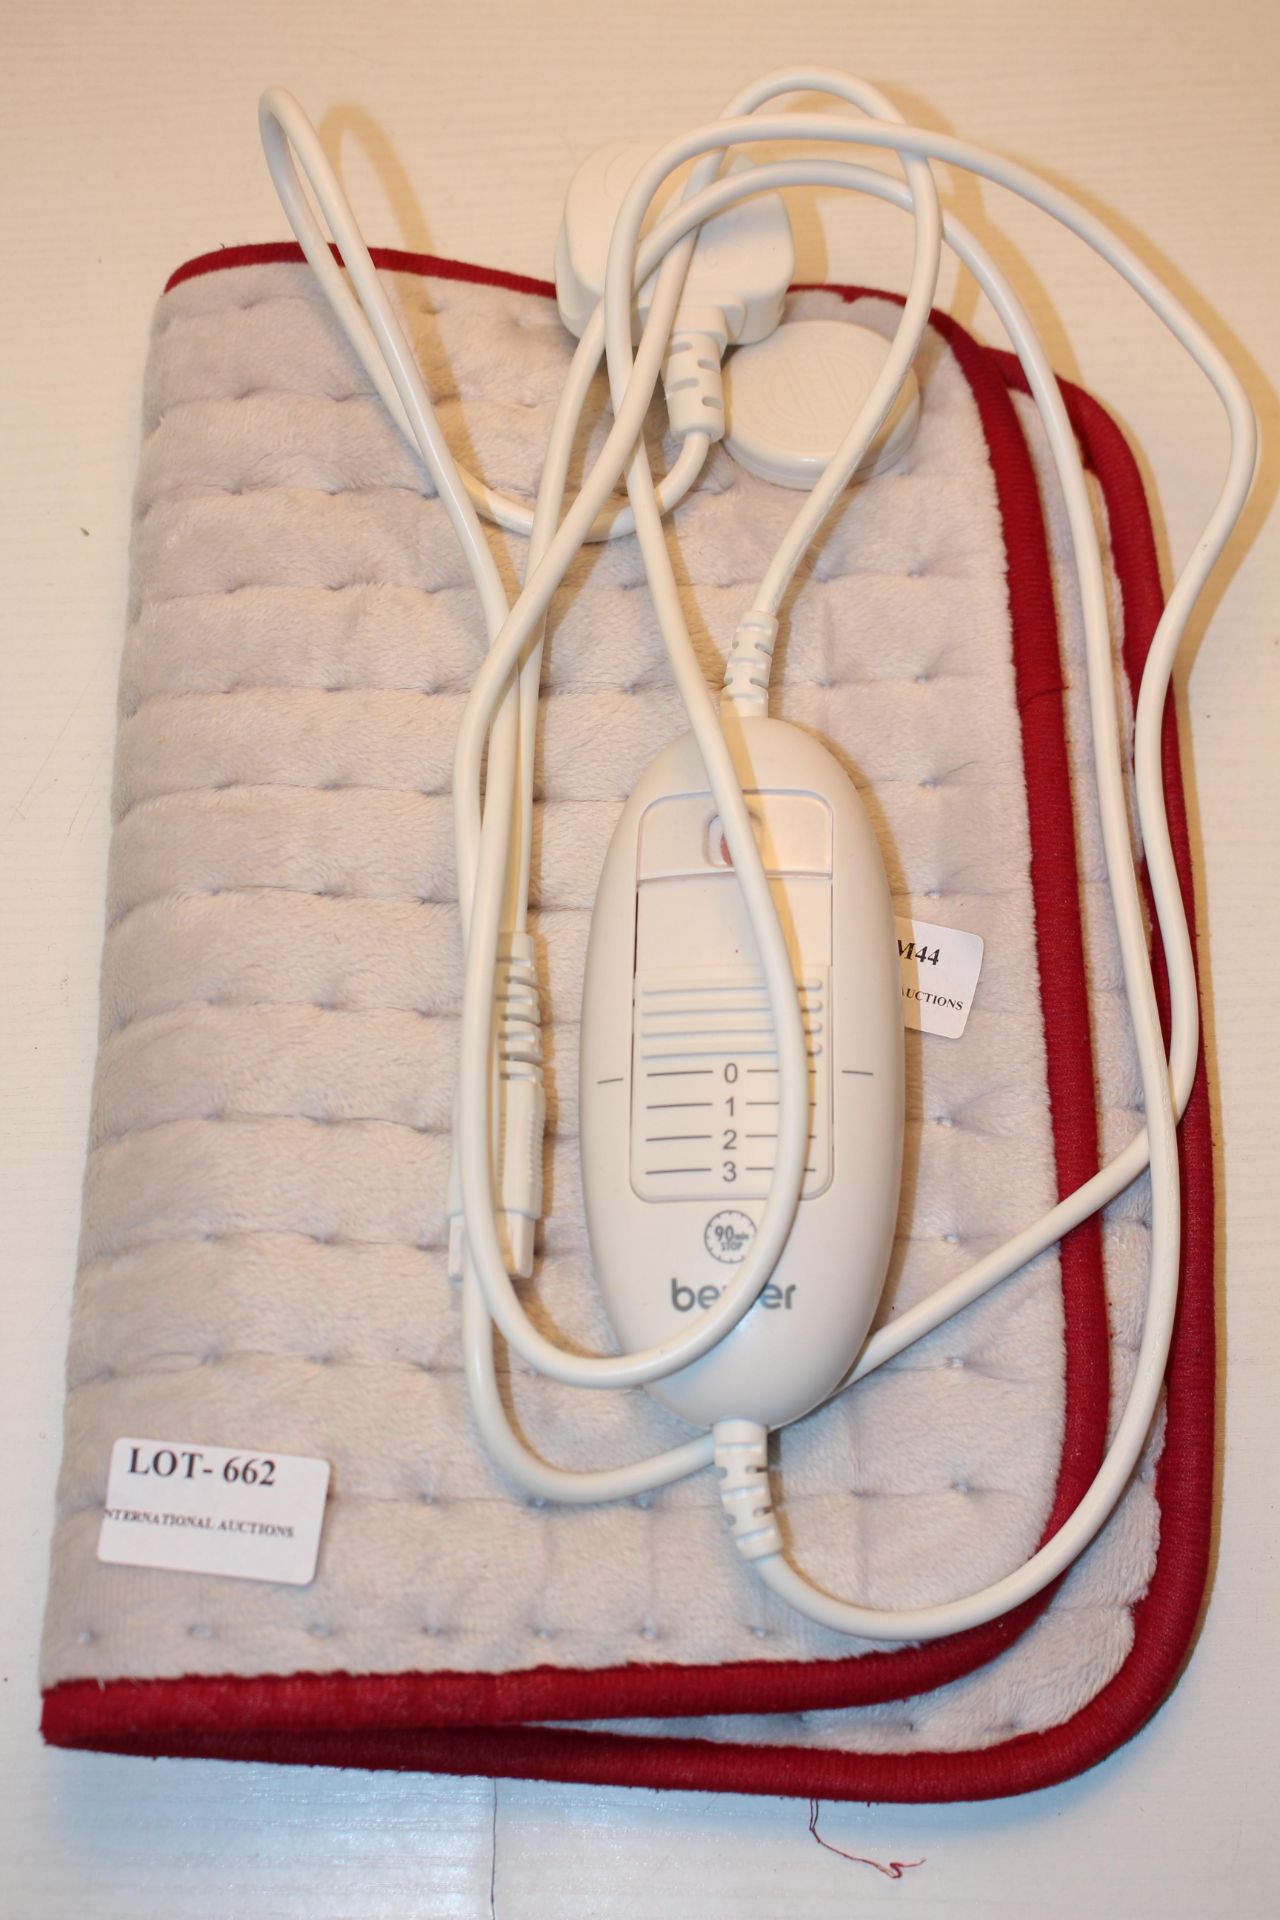 UNBOXED BEURER ELECTRIC HEATED PAD Condition ReportAppraisal Available on Request- All Items are